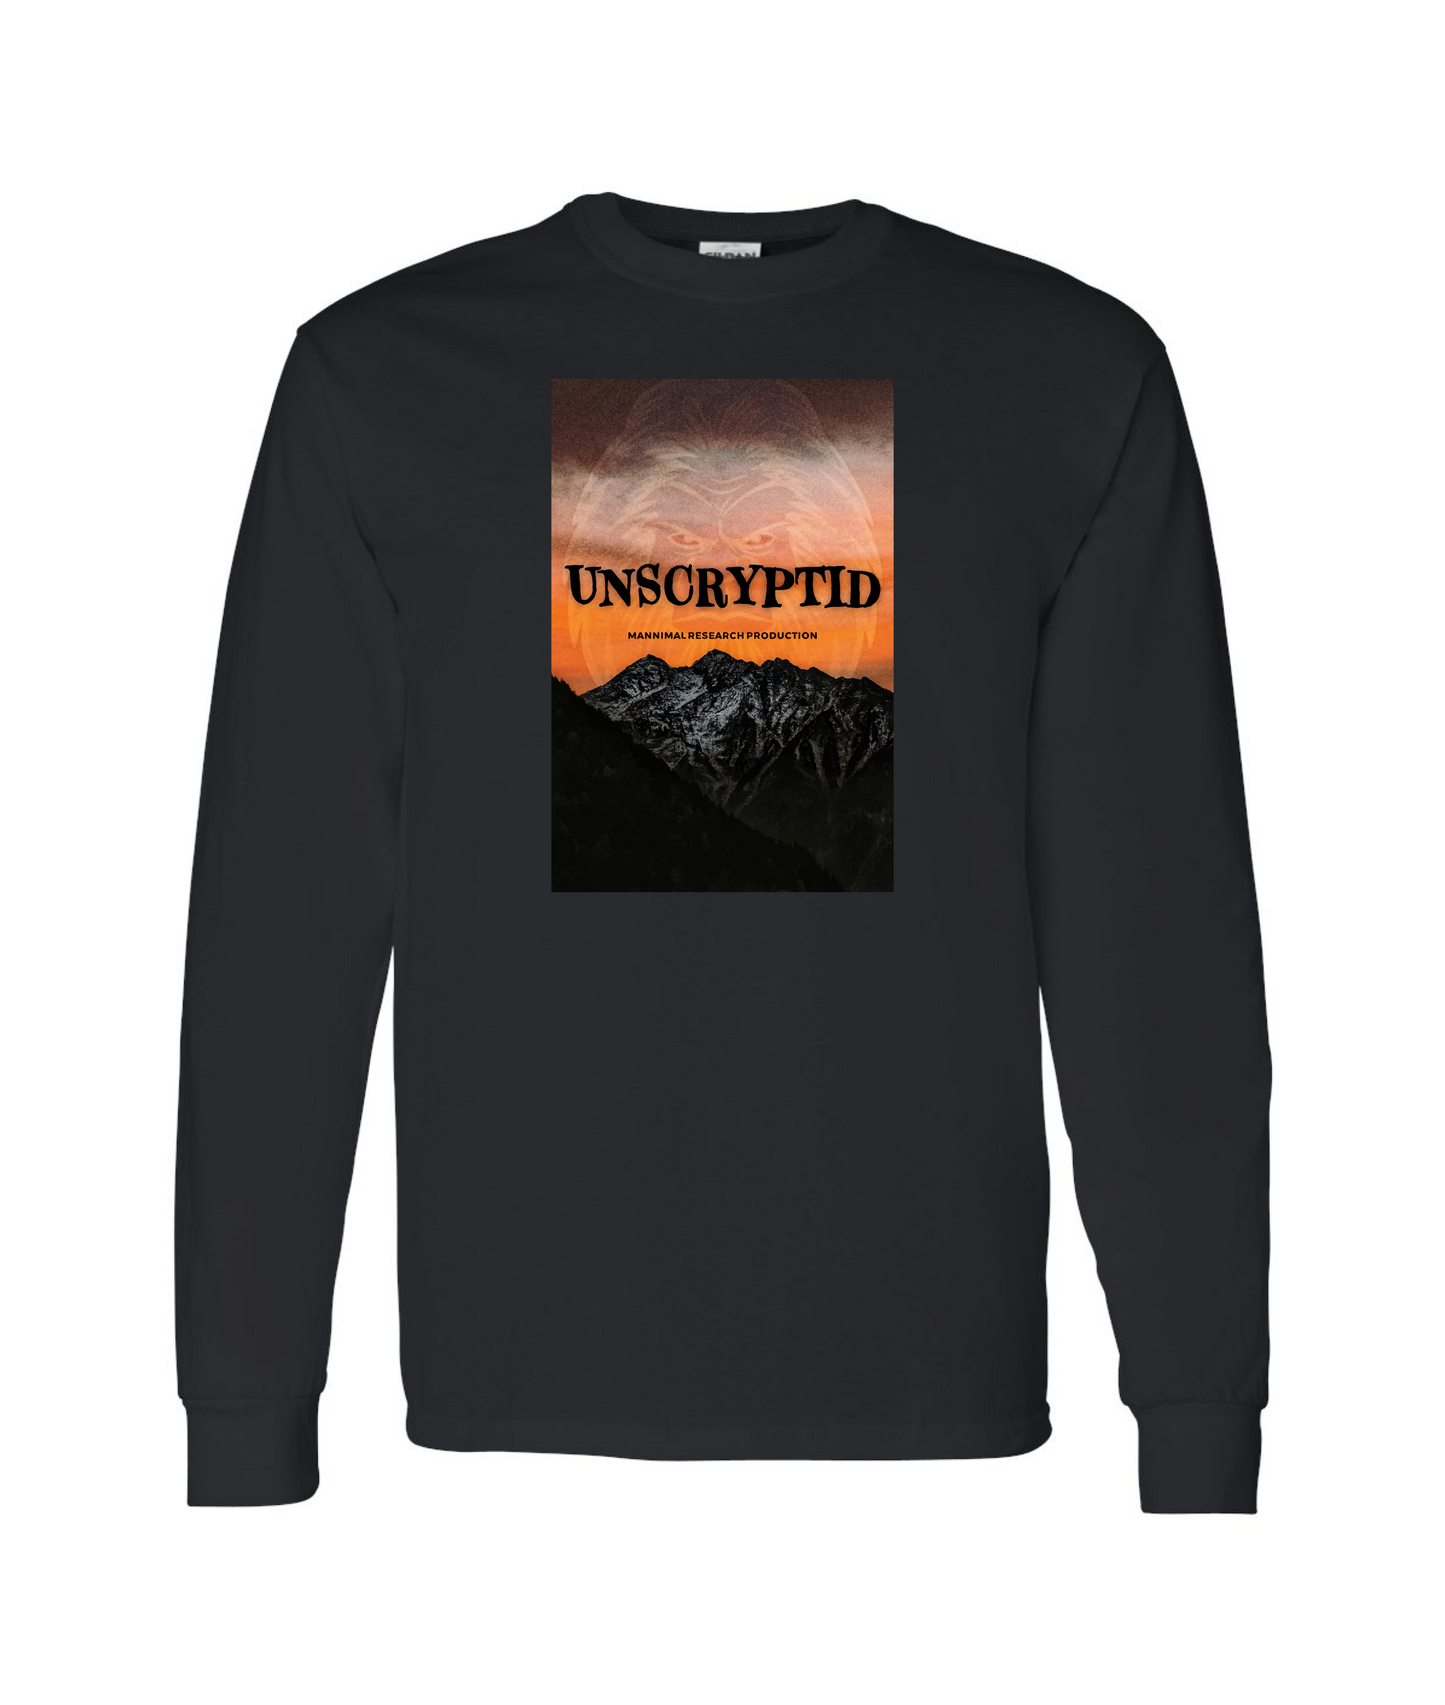 Mannimal Research - Unscryptid - Black Long Sleeve T